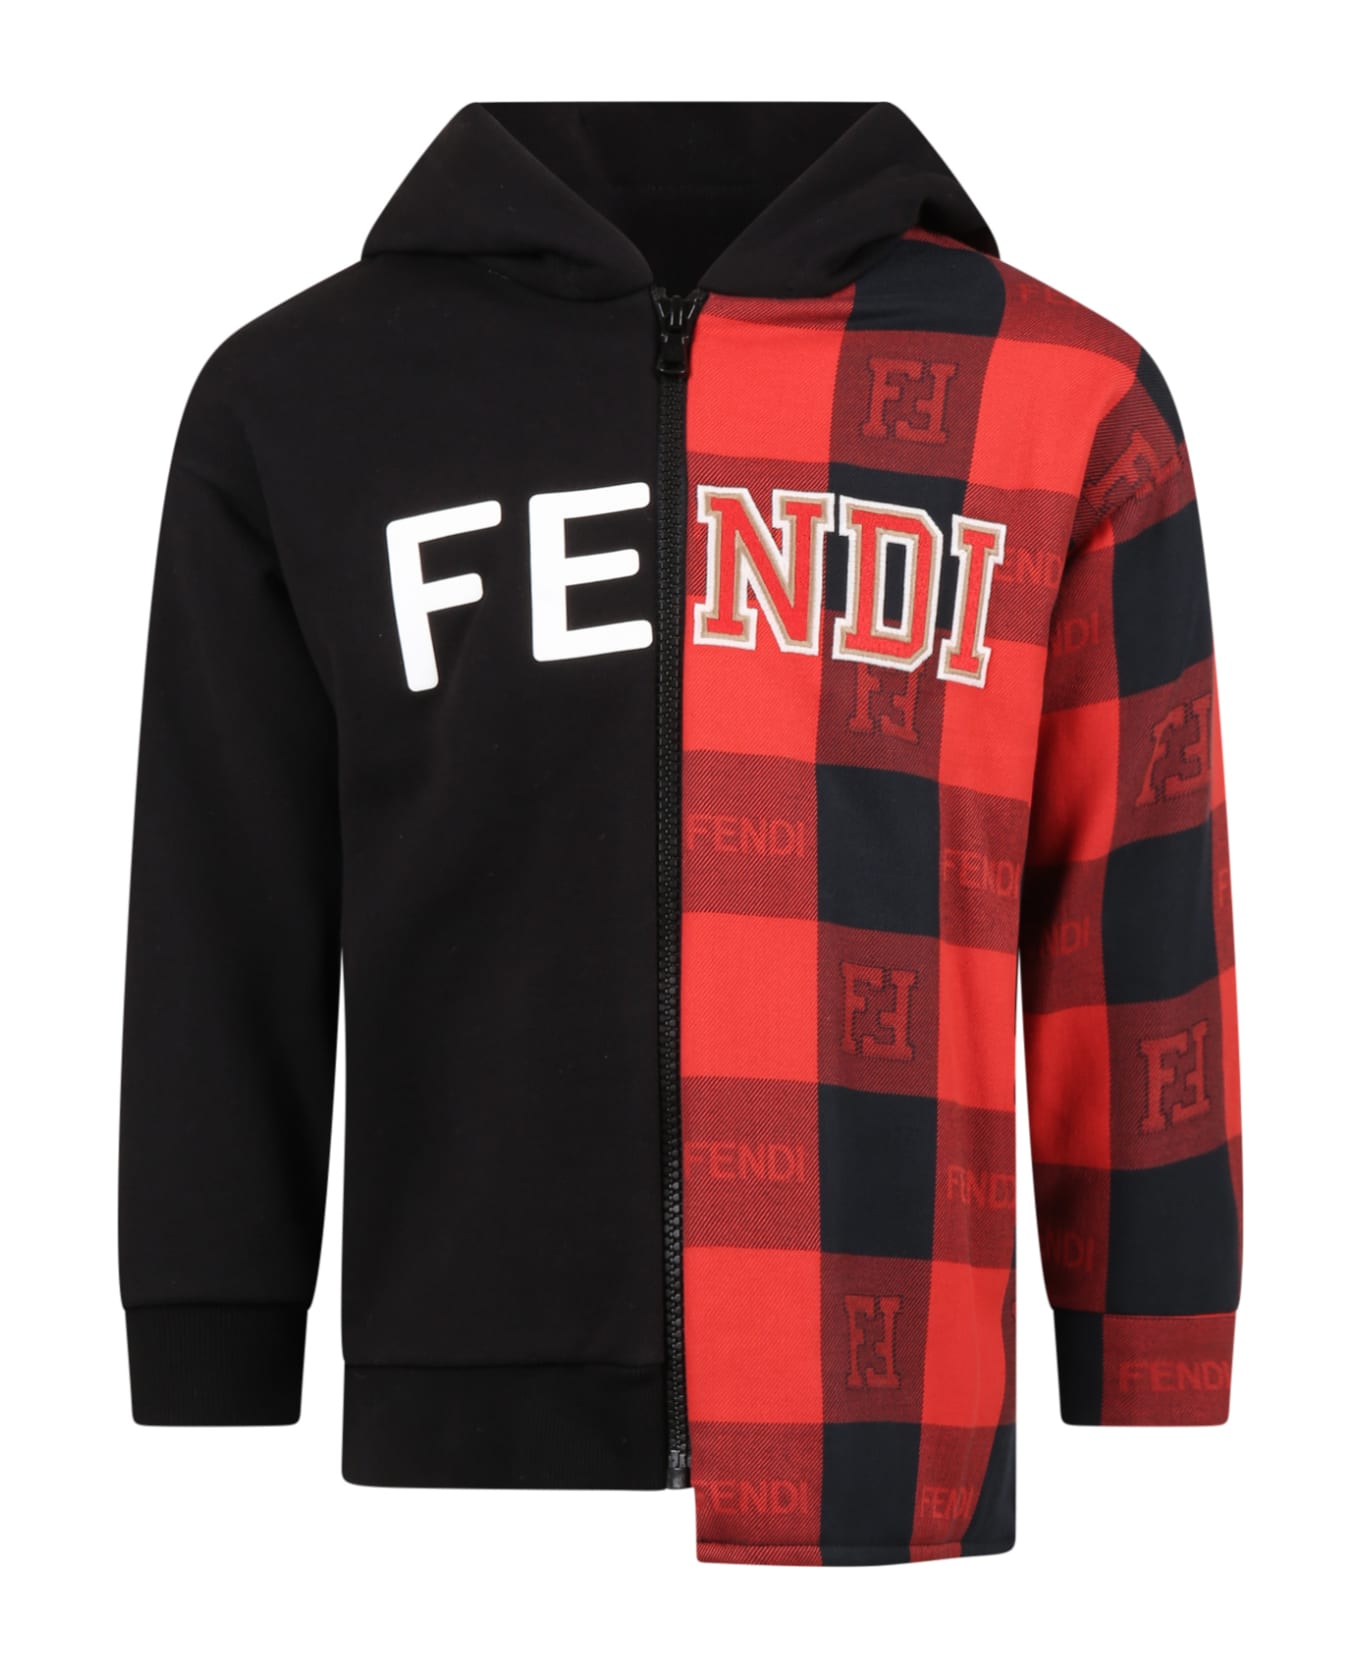 Fendi TEE Black Sweatshirt For Kids With Red Check - Multicolor